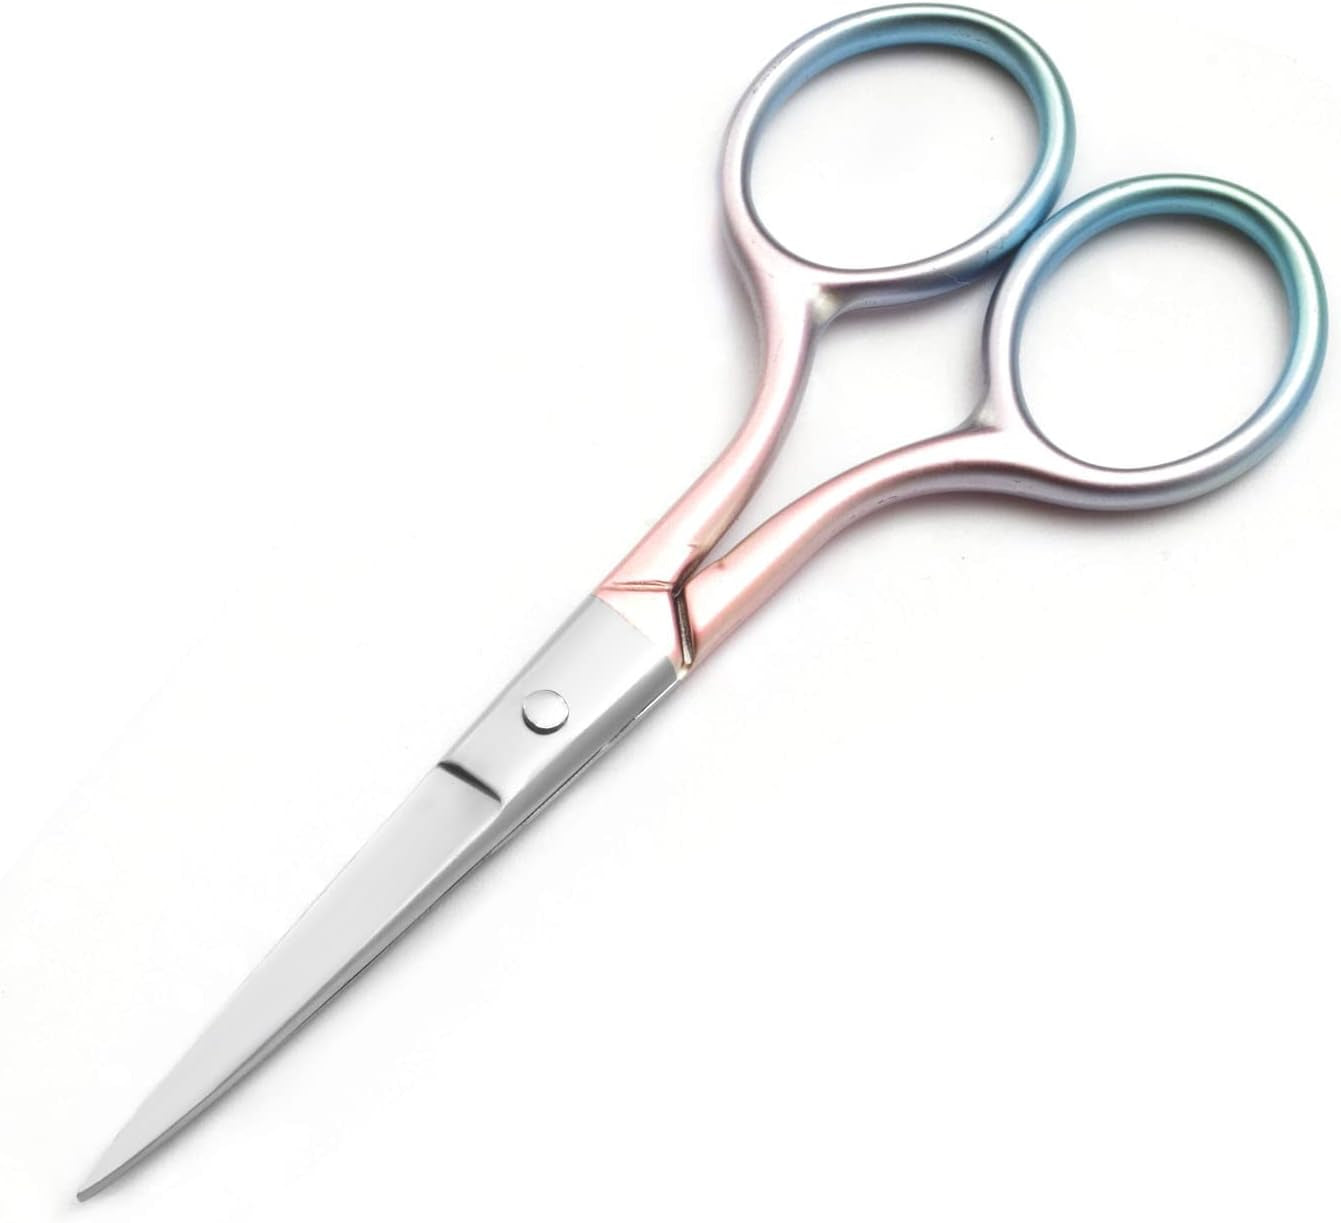 Multicolor Professional Grooming Scissors for Personal Care Facial Hair Removal and Ear Nose Eyebrow Trimming Stainless Steel Fine Straight Tip Scissors 3.9 Inch (Pink)